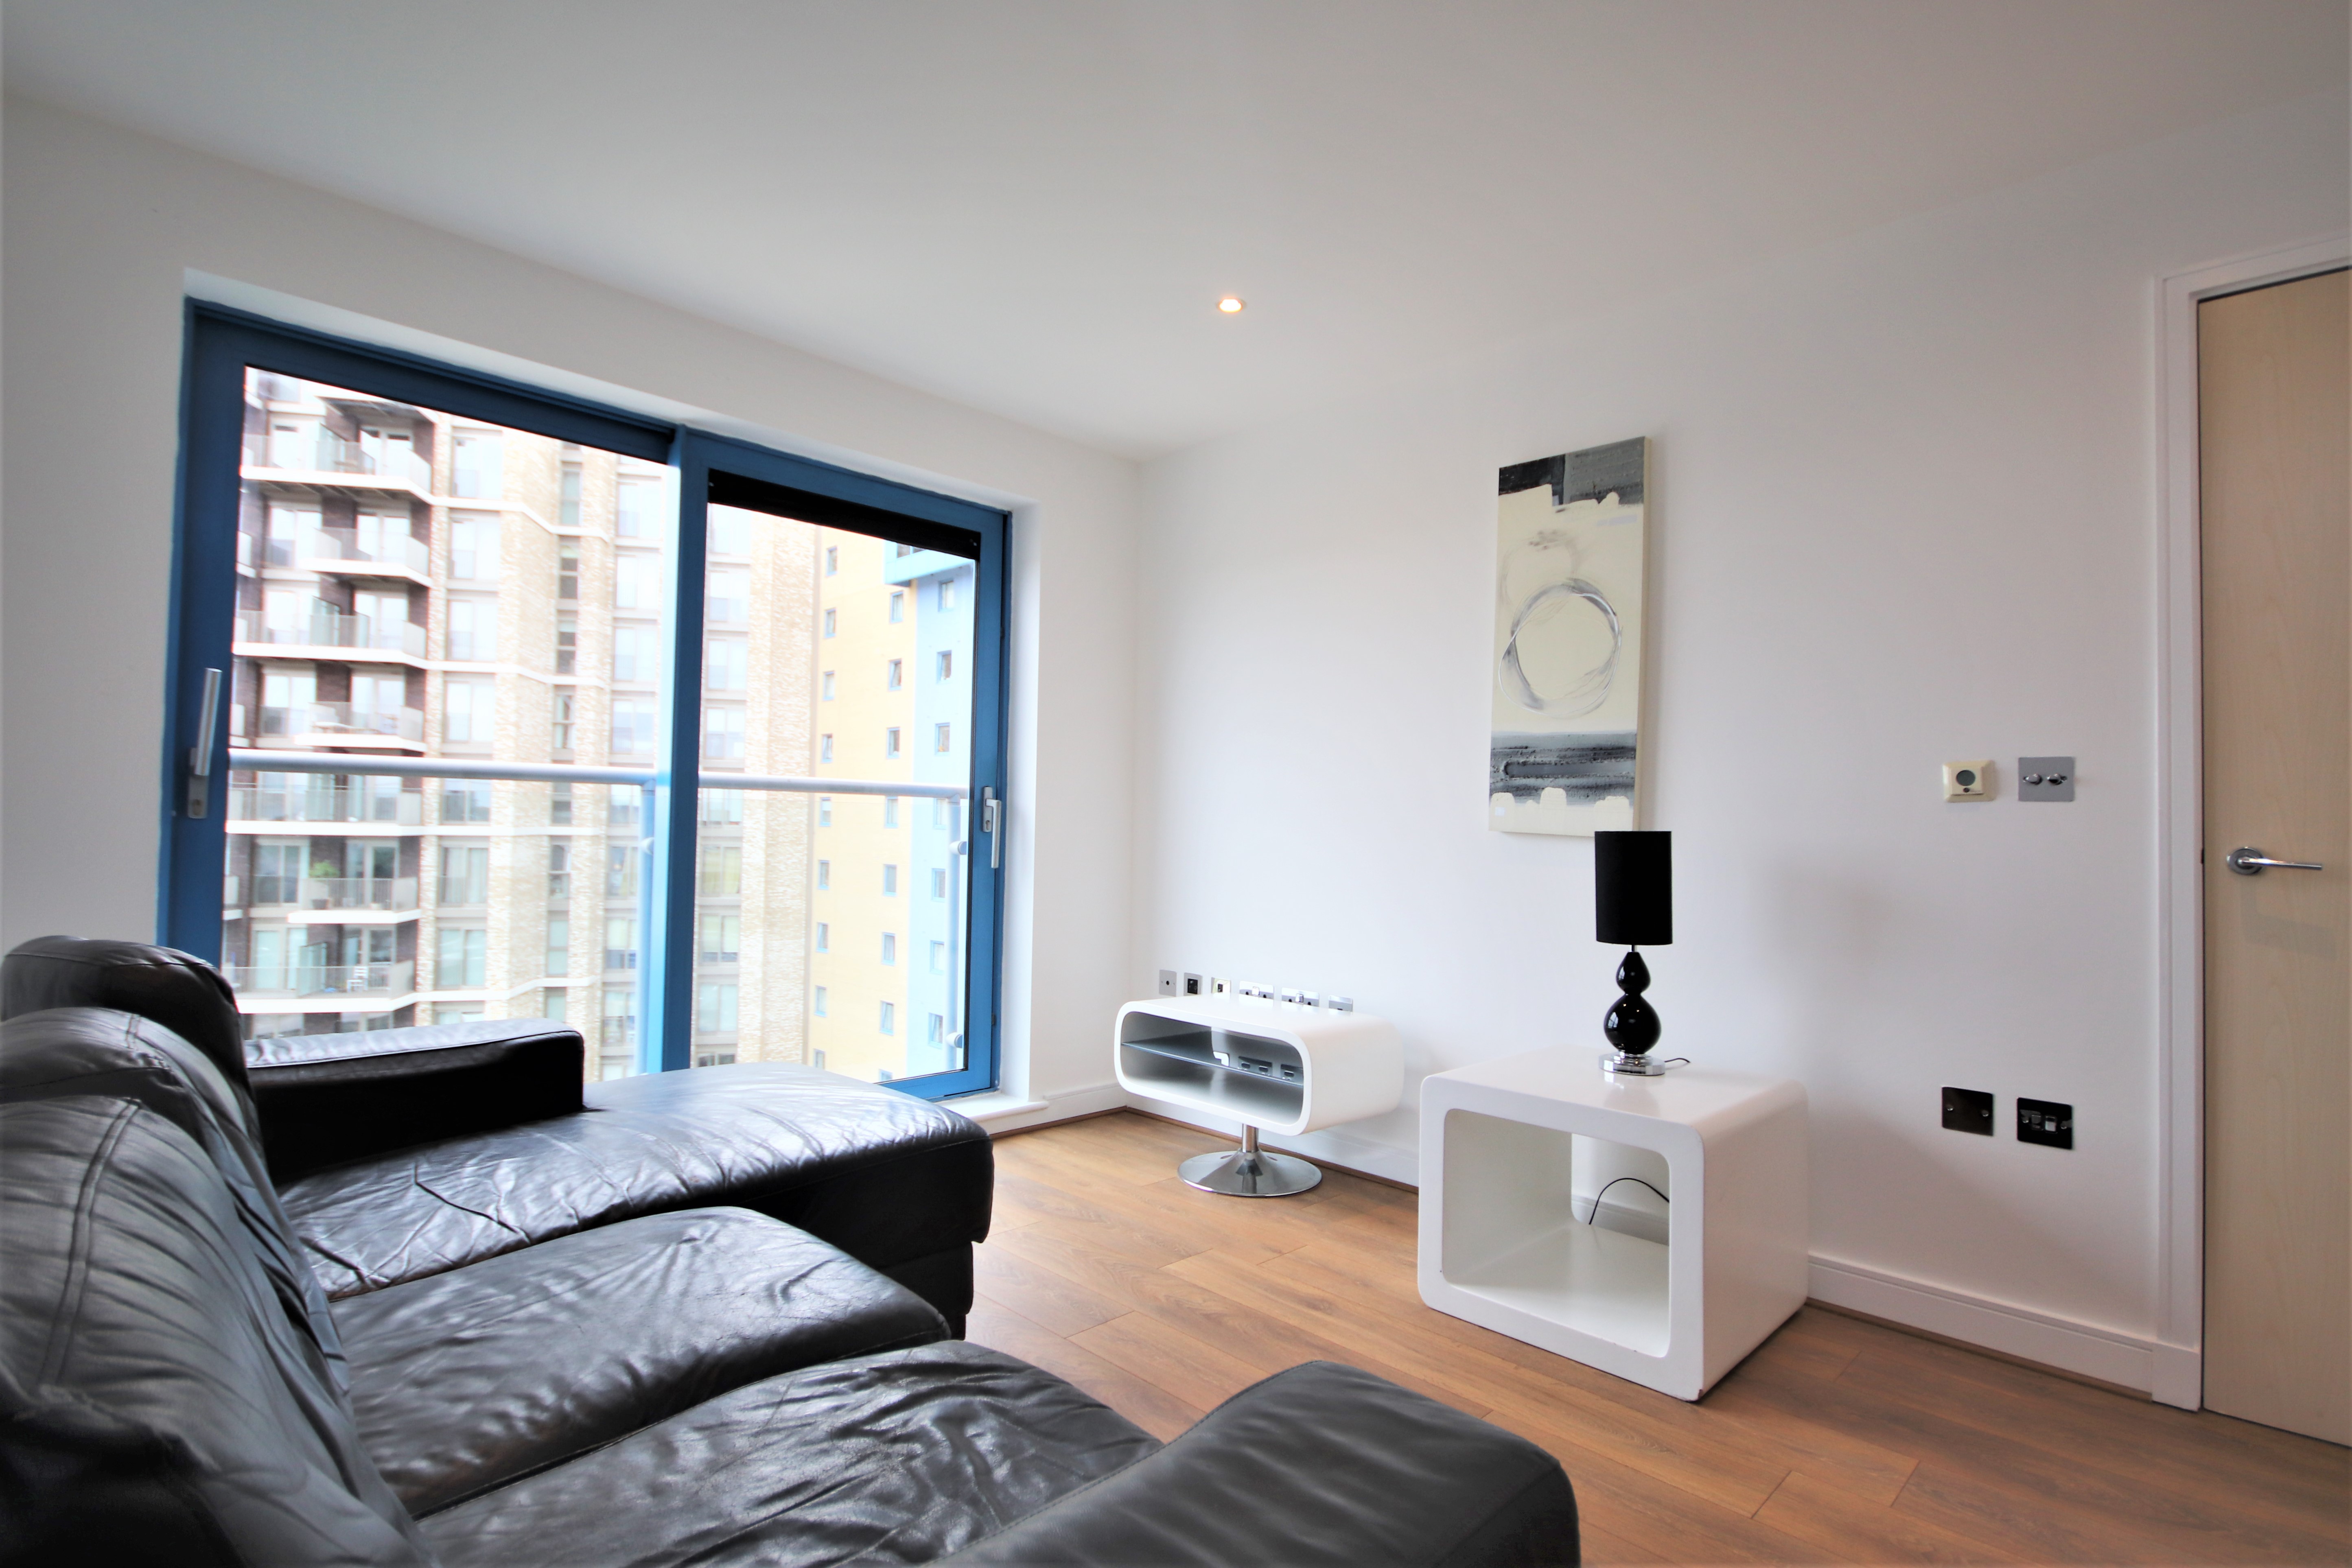 2 bed to rent in Westgate Apartments, London, E16 